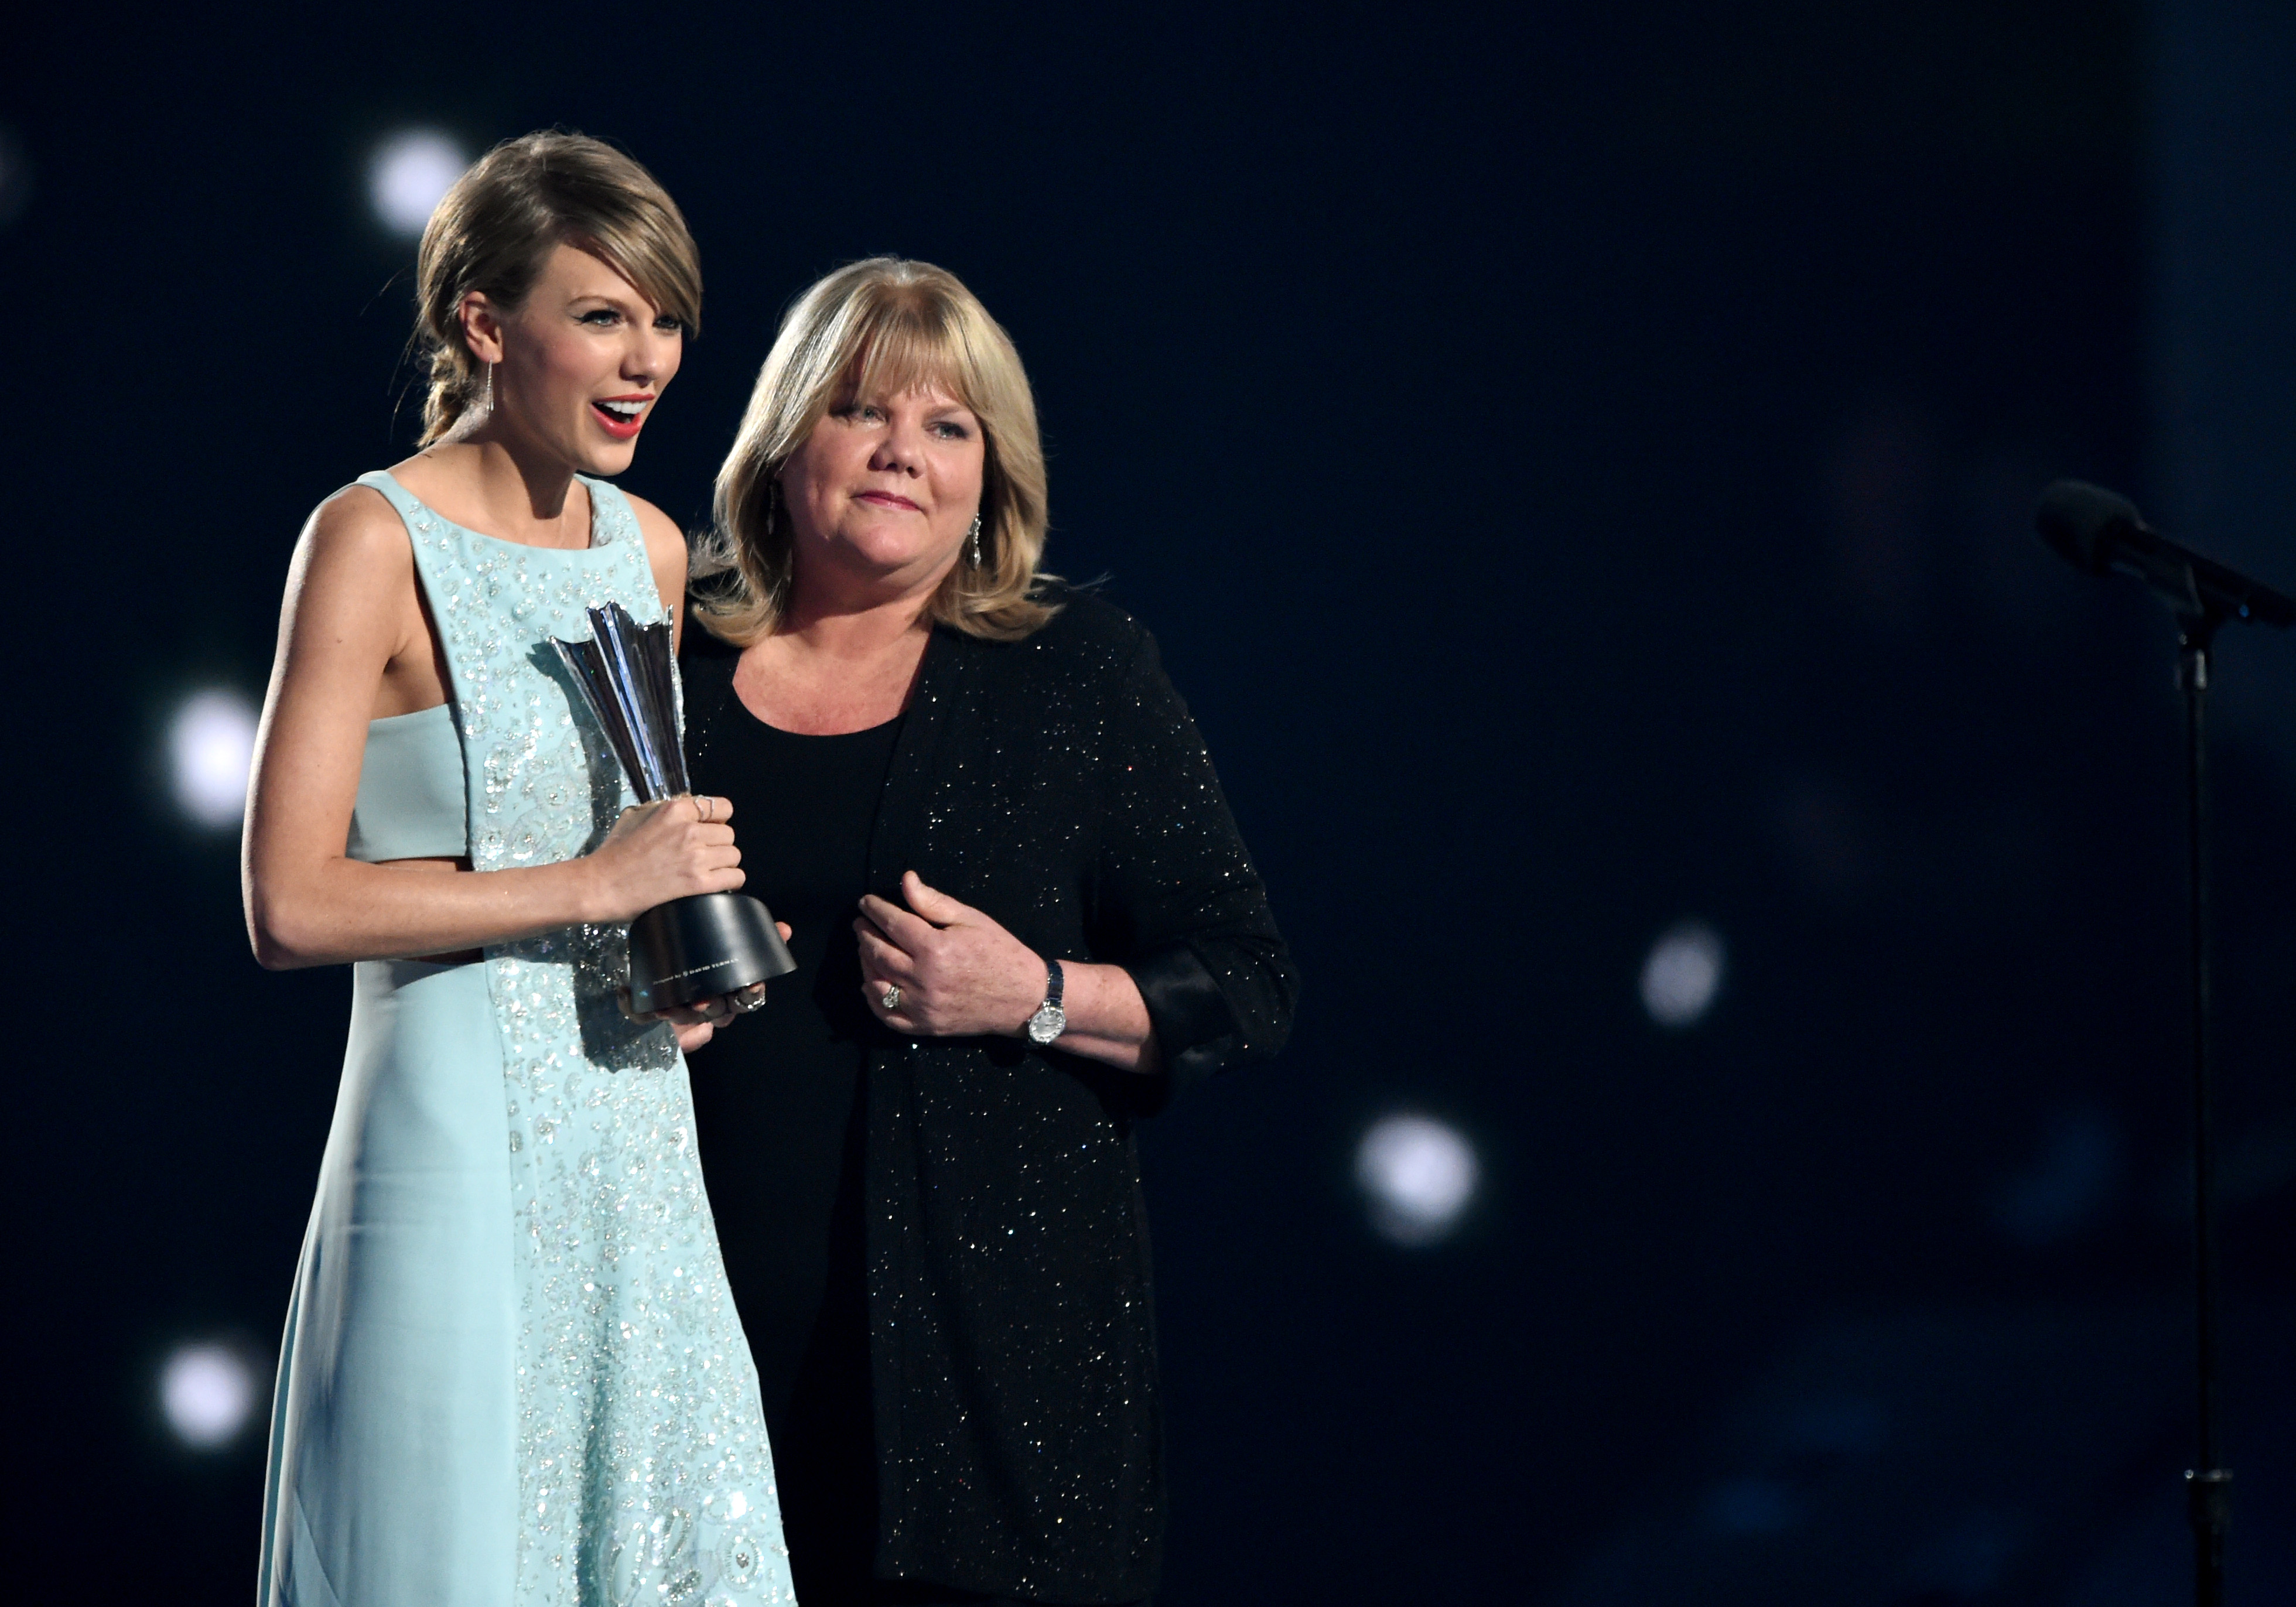 Taylor Swift accepts the Milestone Award from Andrea Swift onstage during the 50th Academy Of Country Music Awards in Arlington, Texas, on April 19, 2015. | Source: Getty Images